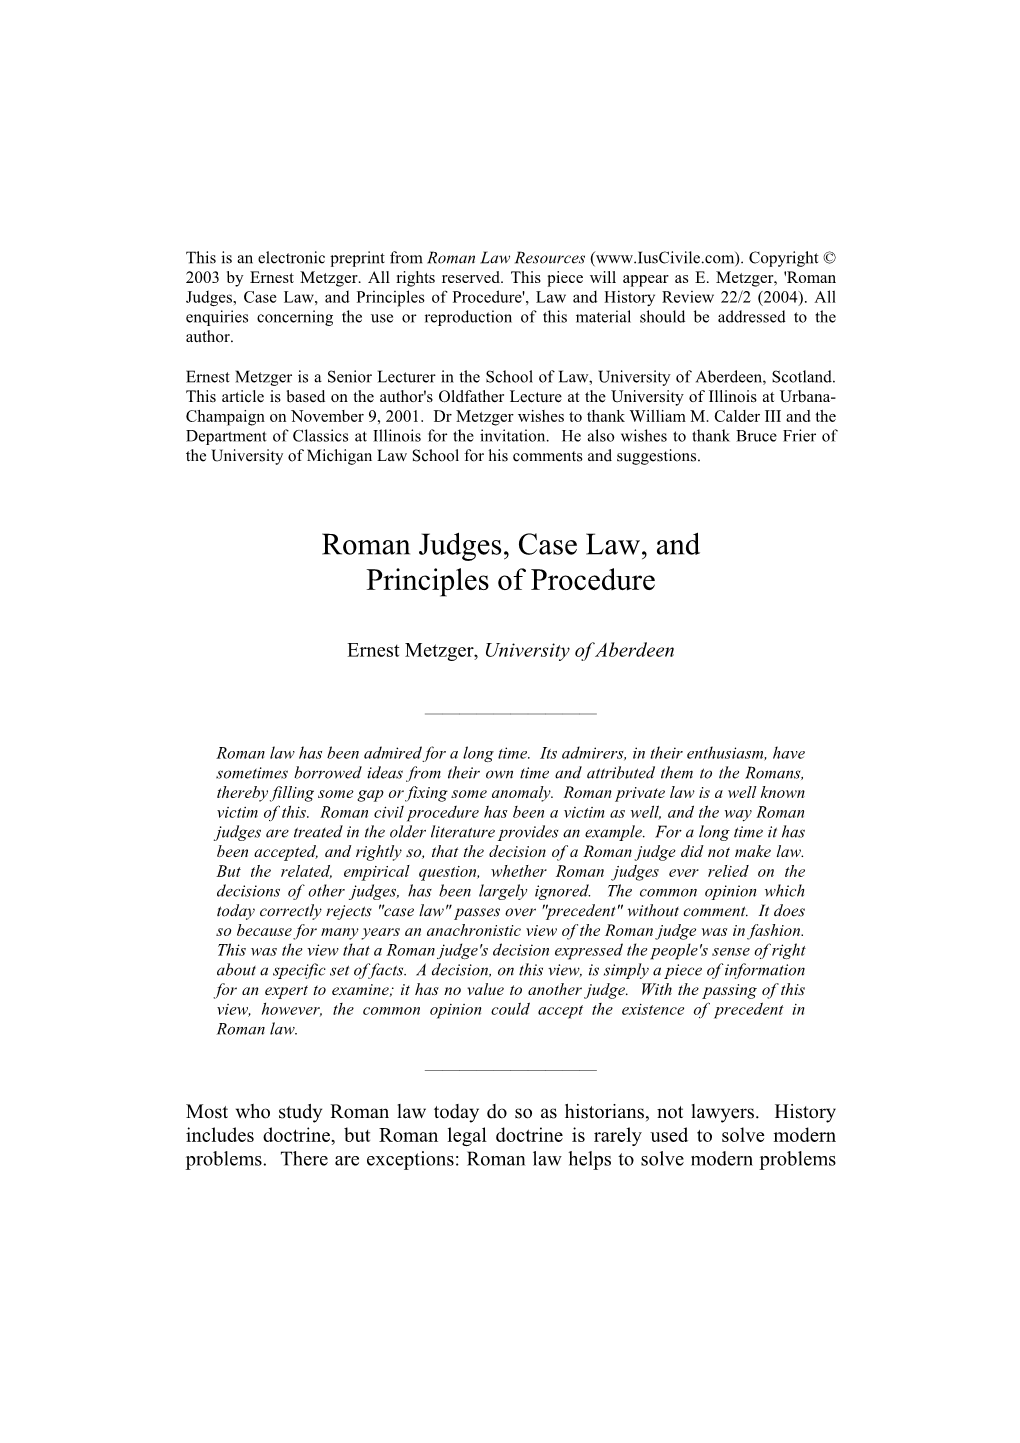 Roman Judges, Case Law, and Principles of Procedure', Law and History Review 22/2 (2004)